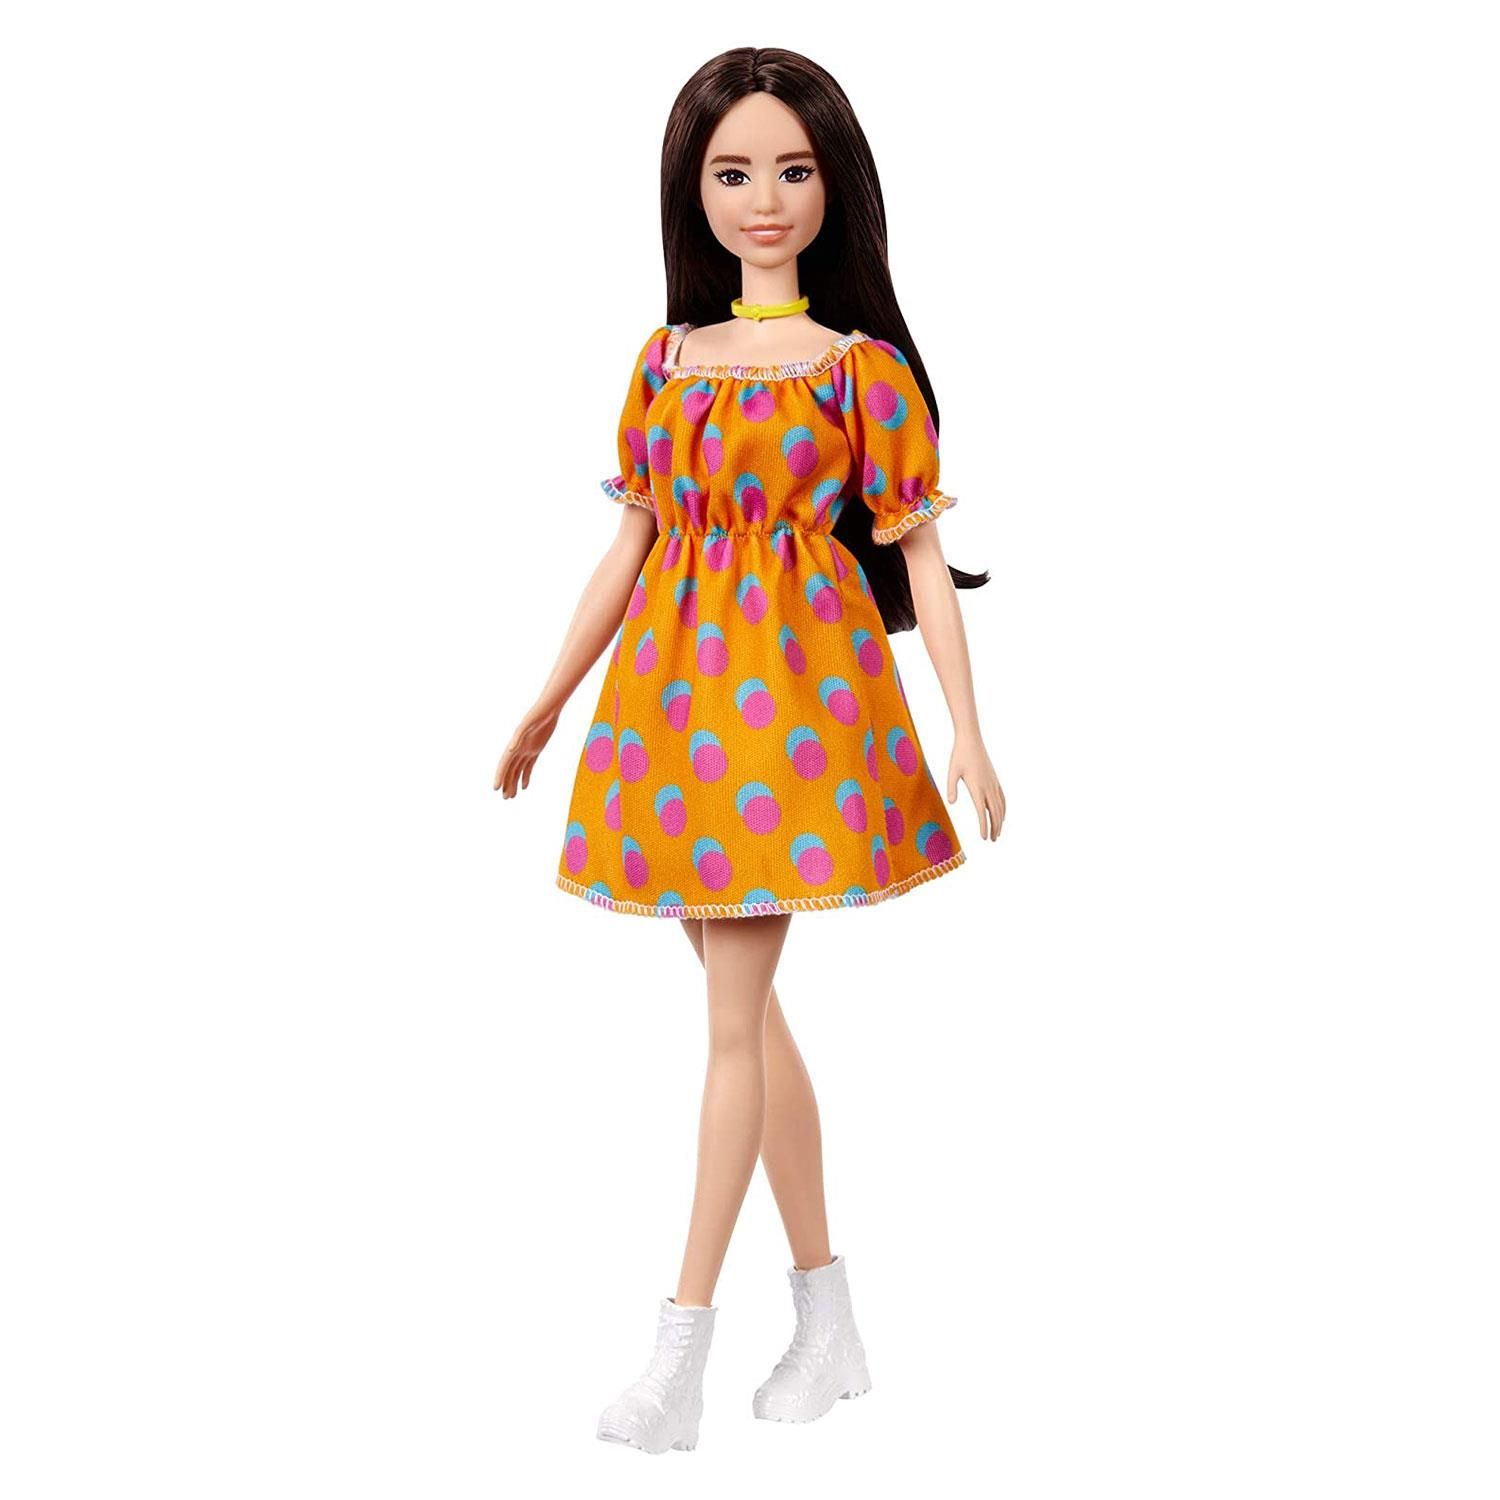 Barbie Fashionista Doll with Orange Fruit Dress, Great Toy For 3 Years Old & Up

Barbie and Ken Fashionistas celebrate diversity with fashion dolls that encourage real-world storytelling and open-ended dreams! With a wide variety of skin tones, eye colours, hair colours and textures, body types and fashions, the dolls are designed to reflect the world kids see today - and their attention-grabbing outfits help them stand out with personalities that pop! Use the reusable vinyl package to fill, carry and customize - store Barbie fashions and accessories, carry a doll anywhere or decorate and use it as a cross-body purse! Kids can collect Barbie dolls and accessories for infinite ways to play out stories, express their own style and discover that fashion is fun for everyone! Includes Barbie Fashionistas doll wearing fashions and accessories. 

Features:

The latest line of BarbieFashionistas dolls includes different body types and a mix of skin tones, eye colours, hair colours, hairstyles and so many fashions inspired by the latest trends!​
Barbiedoll is the Original body type and wears an orange dress with a colourful pattern.​

White shoes and a yellow choker necklace complete the outfit with cool touches, and her long brunette hair is styled with a slight wave for a trendy look. ​

Designed with a zipper, the reusable vinyl bag can be used to store the doll or other Barbiefashions and accessories, and kids can customize it with their own art supplies, like stickers. There are endless ways to play --fill it, carry it and customize it!

Specifications:

Toy Type: Doll
Material: Abs Plastic
Colour: Orange
Age Range: 3 Years & up

Package Includes: Barbie Fashionista Doll, Orange Fruit Dress